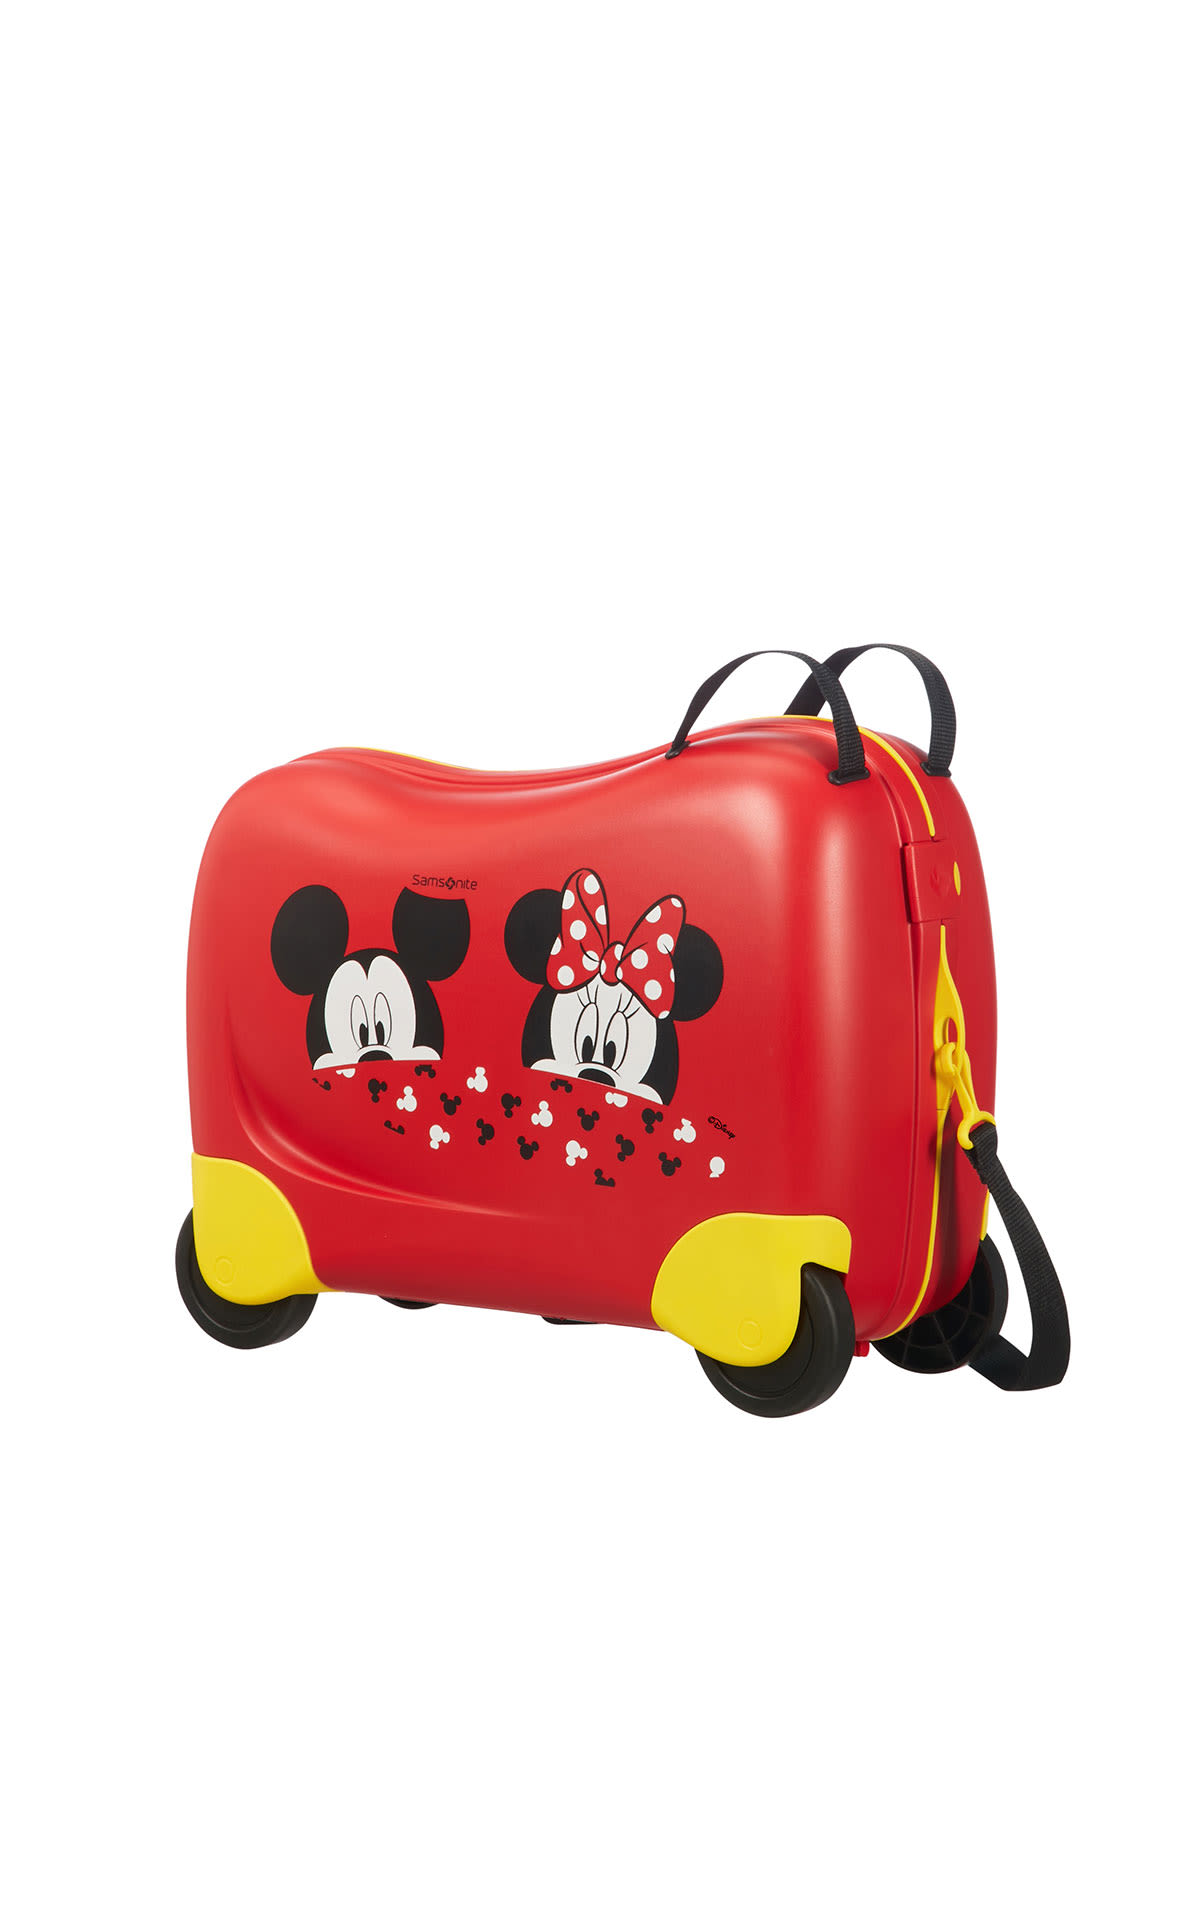 children's suitcase backpack